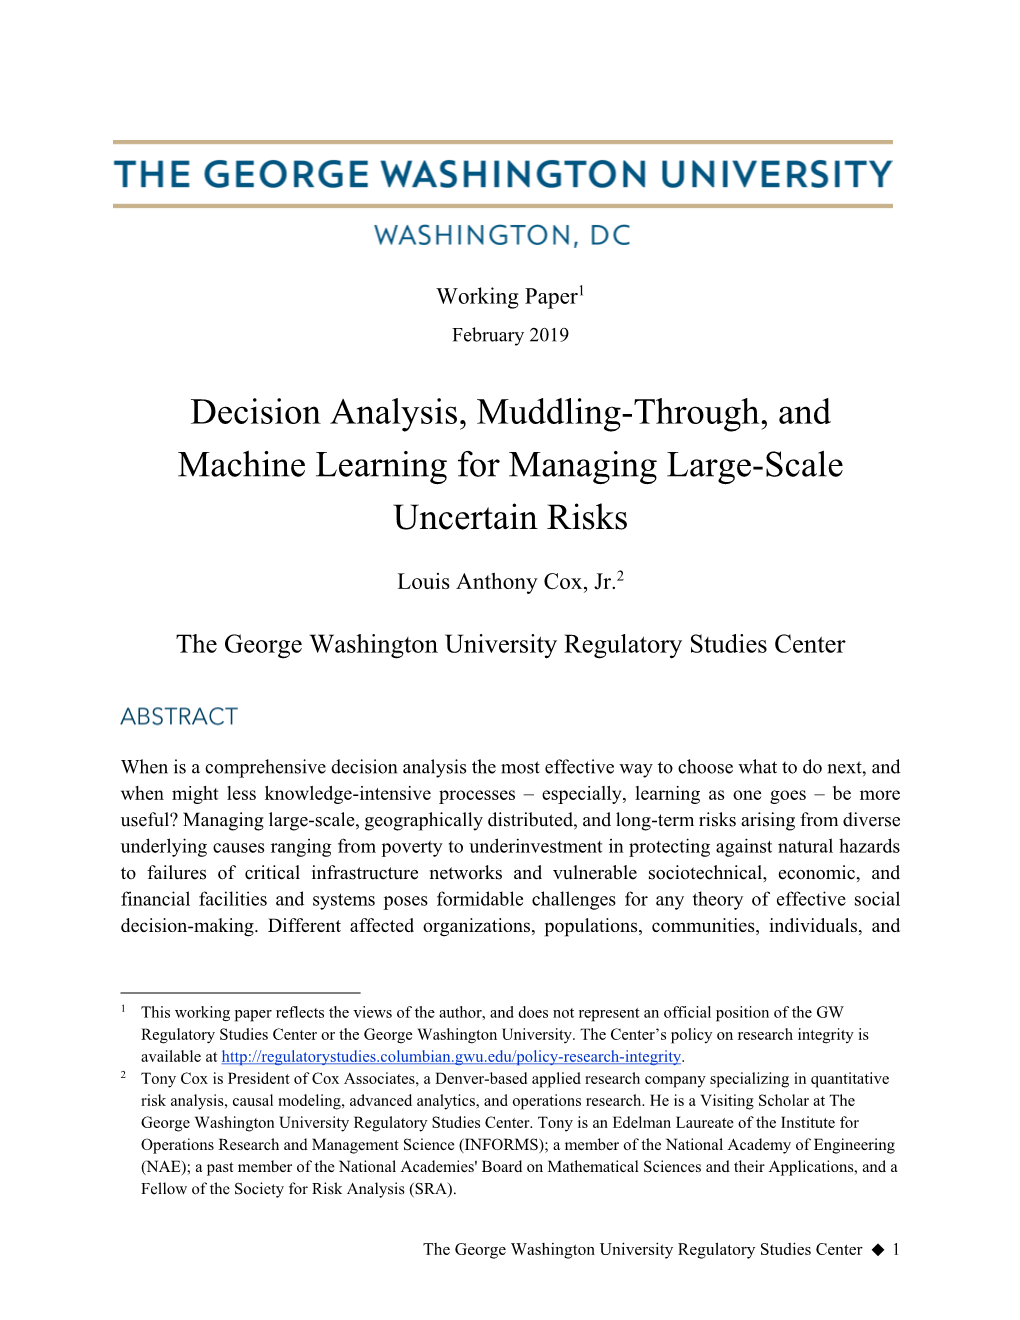 Decision Analysis, Muddling-Through, and Machine Learning for Managing Large-Scale Uncertain Risks